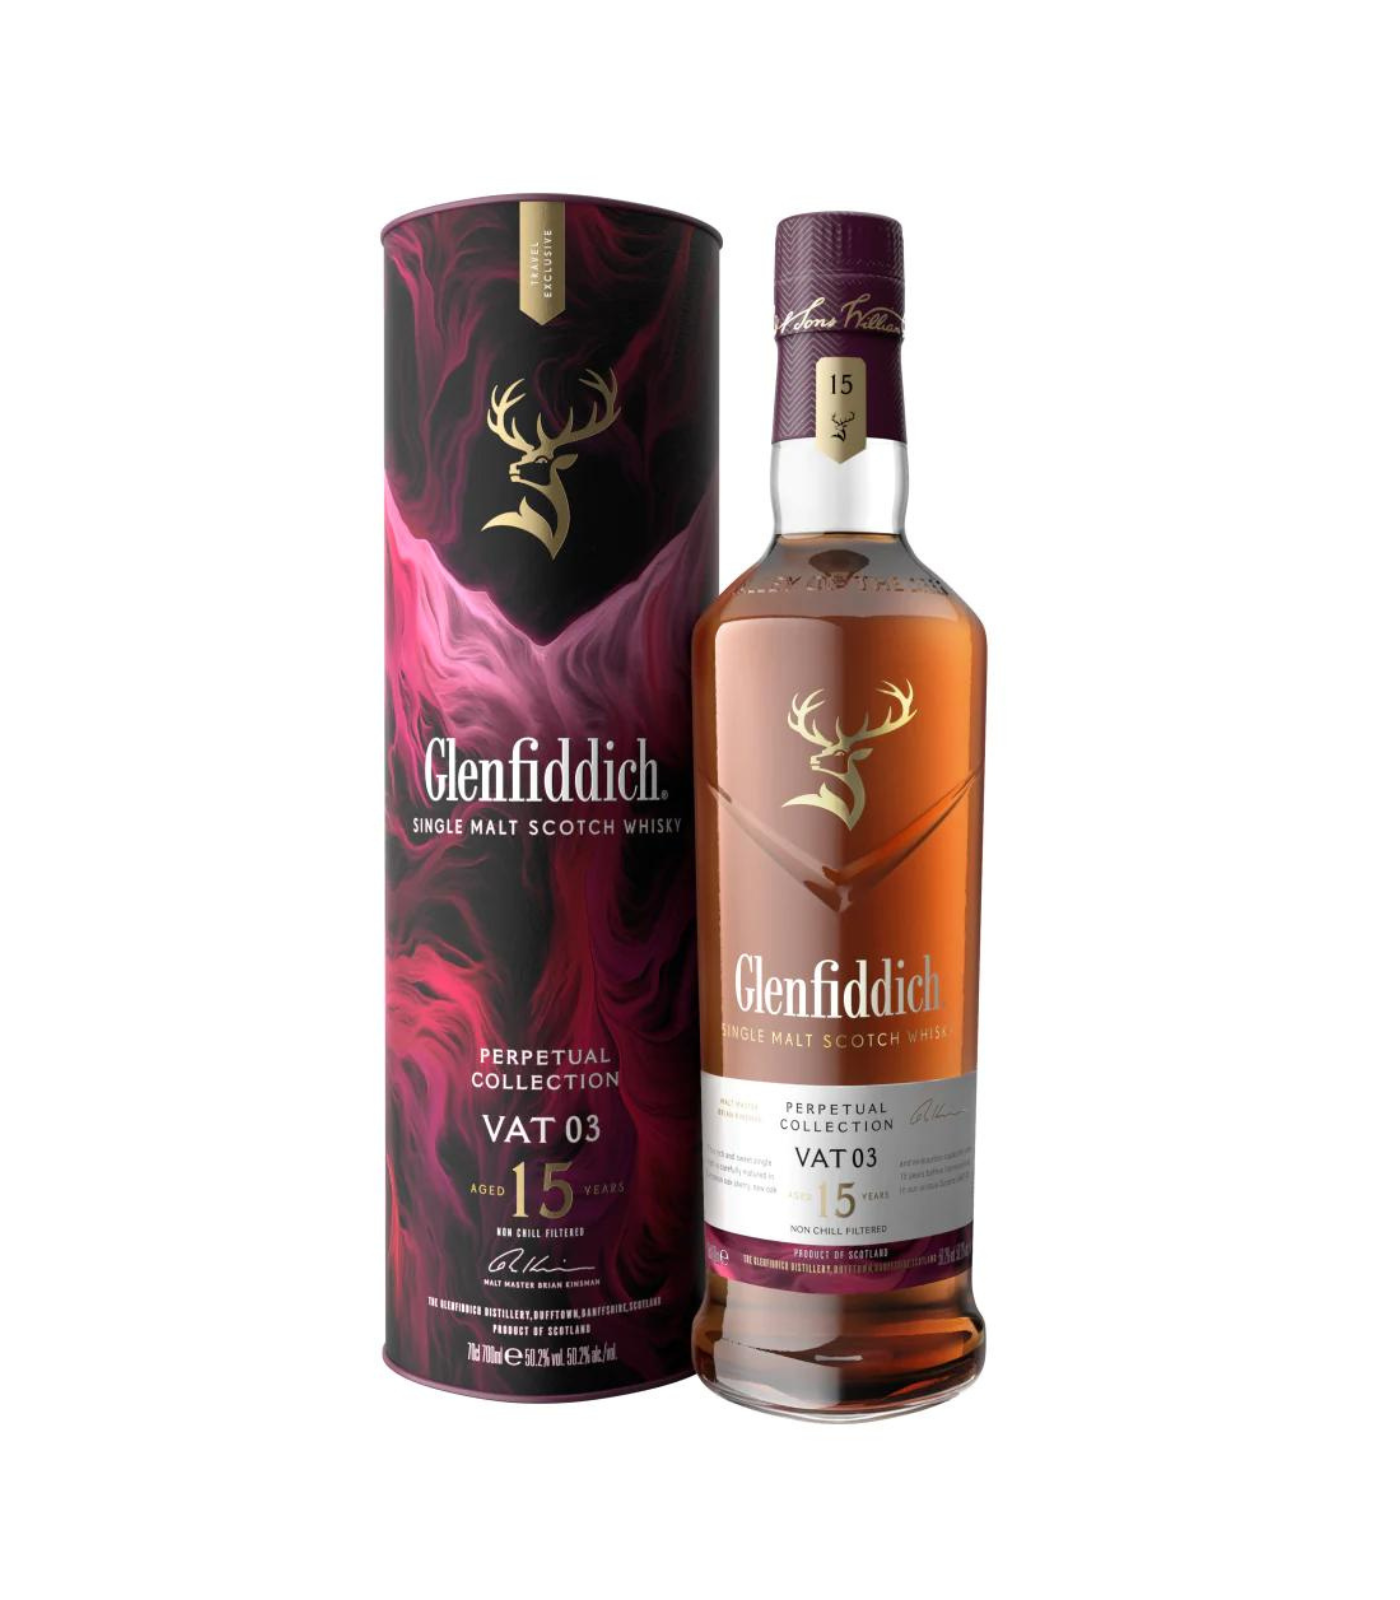 Glenfiddich 15 Year Old - Perpetual Collection Vat 03 Whisky (70cl, 50.2%) ﻿